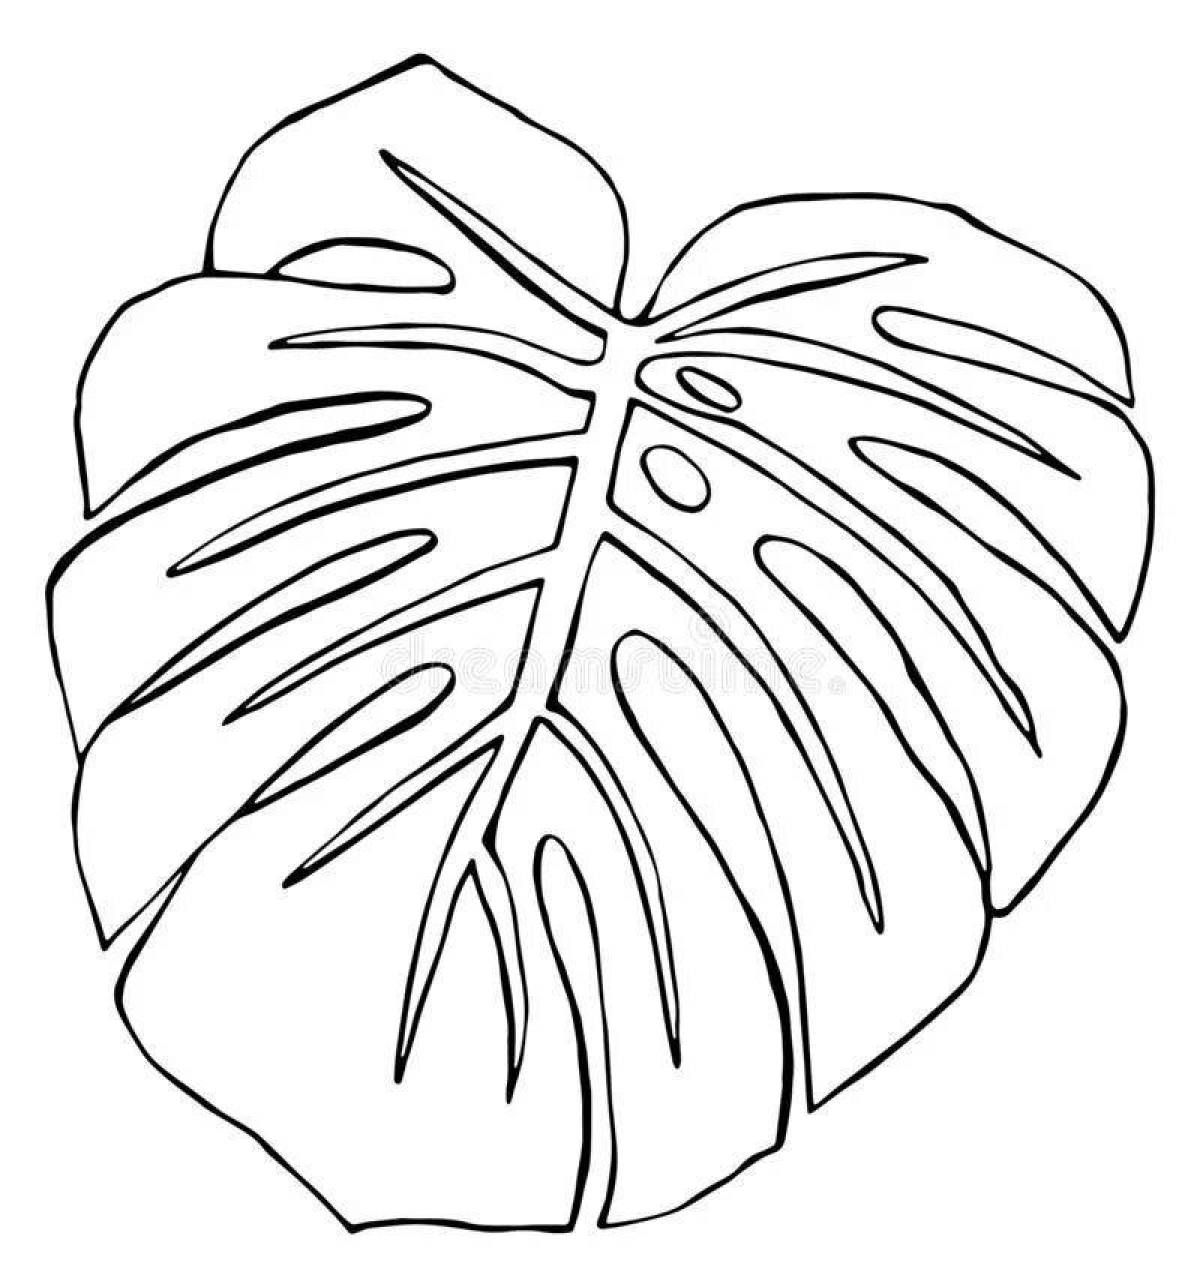 Calming monstera leaf coloring page